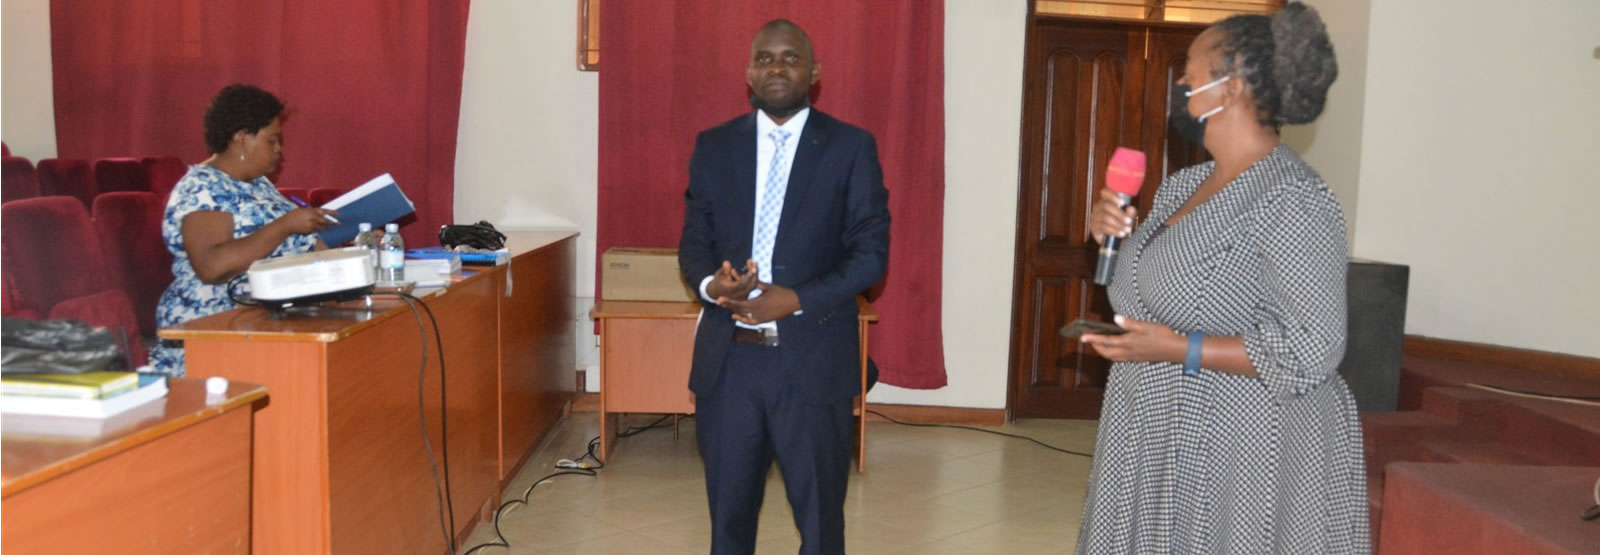   Mr. Ronald Kayiwa successfully defended his PhD thesis 